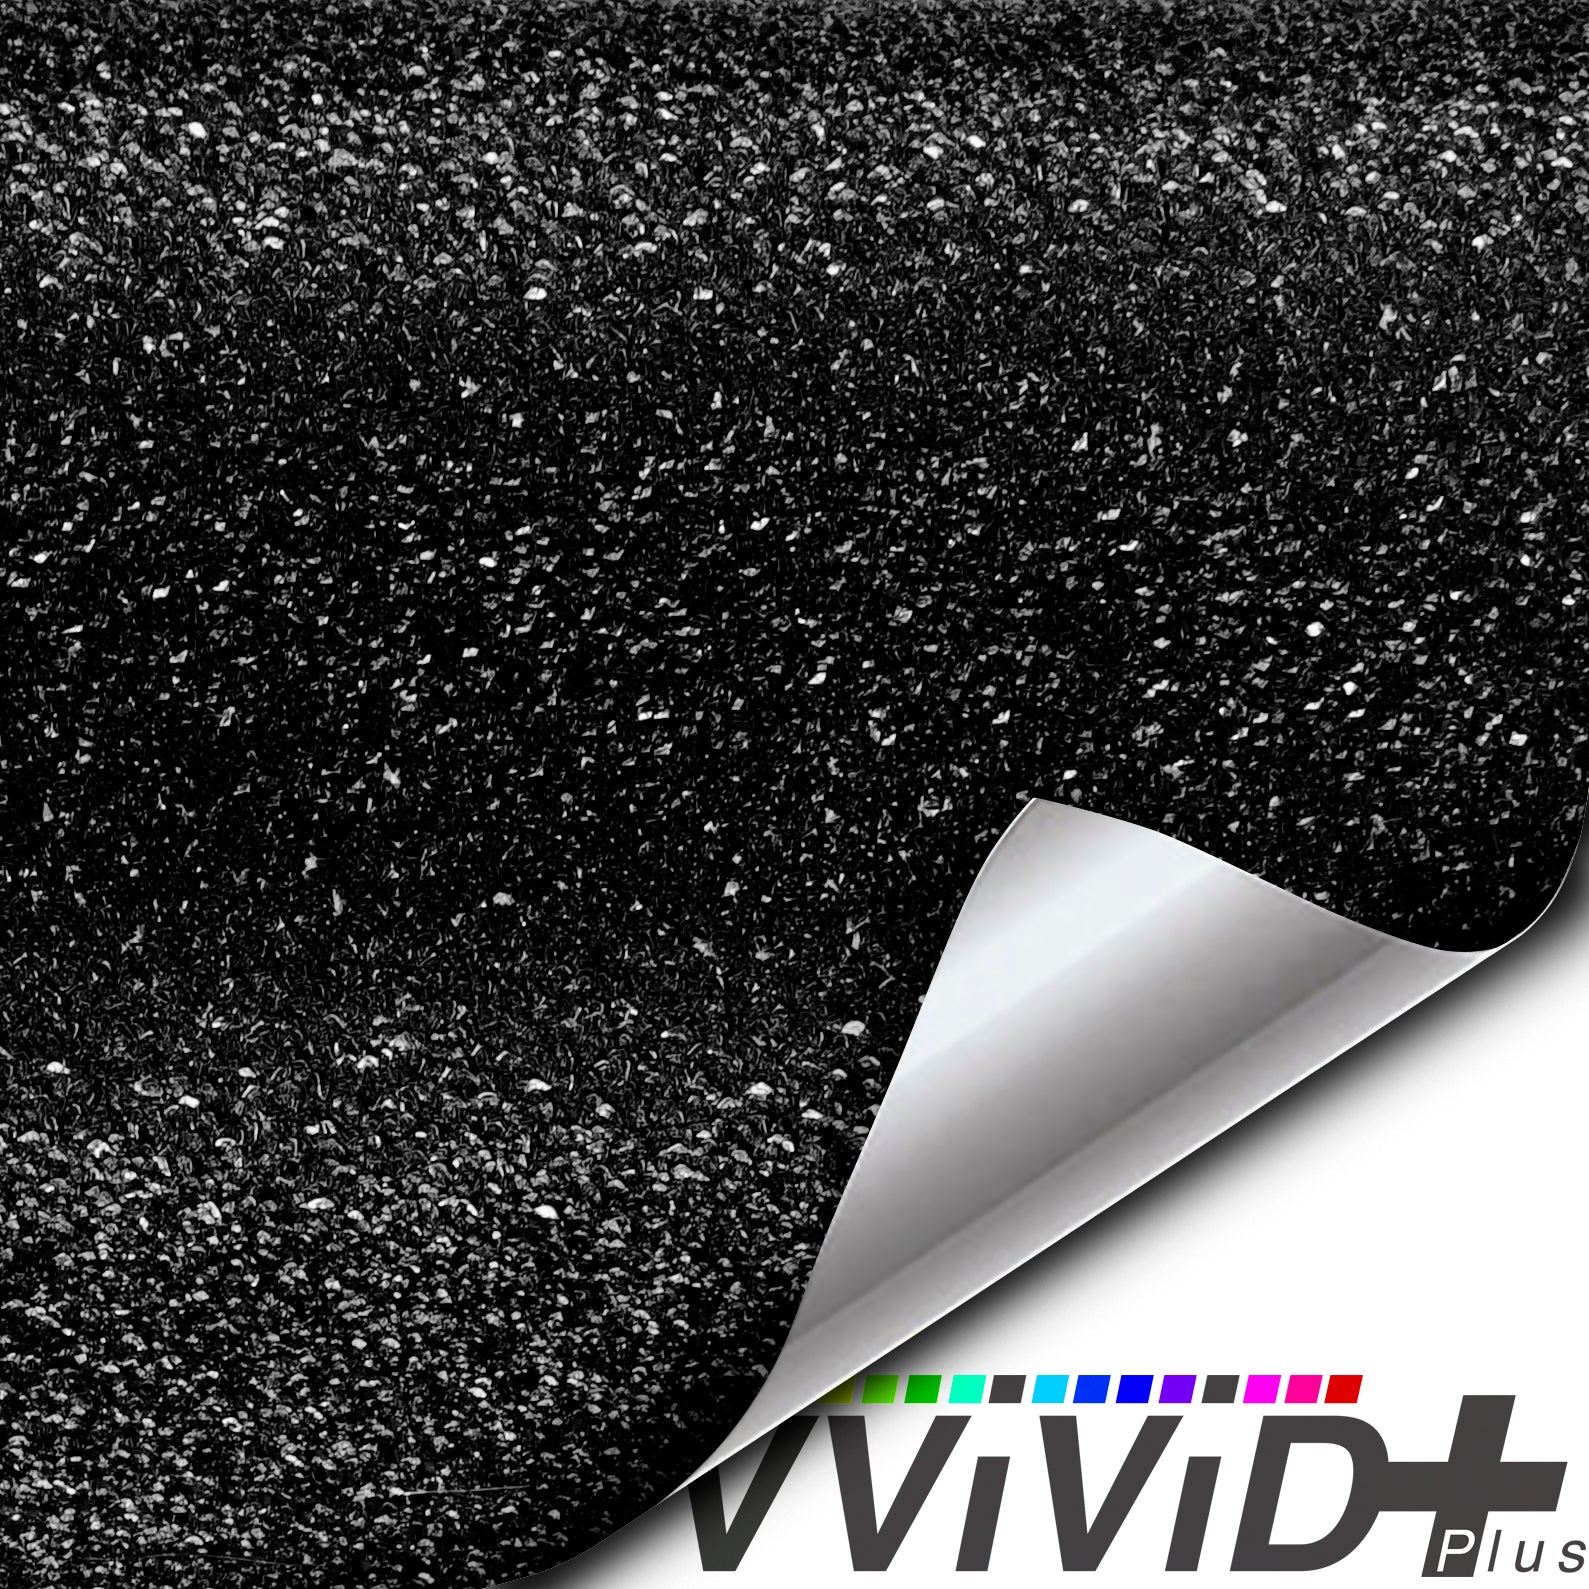 VViViD Scientific Heat Gun 1500w the best for Vinyl wrap and removal.